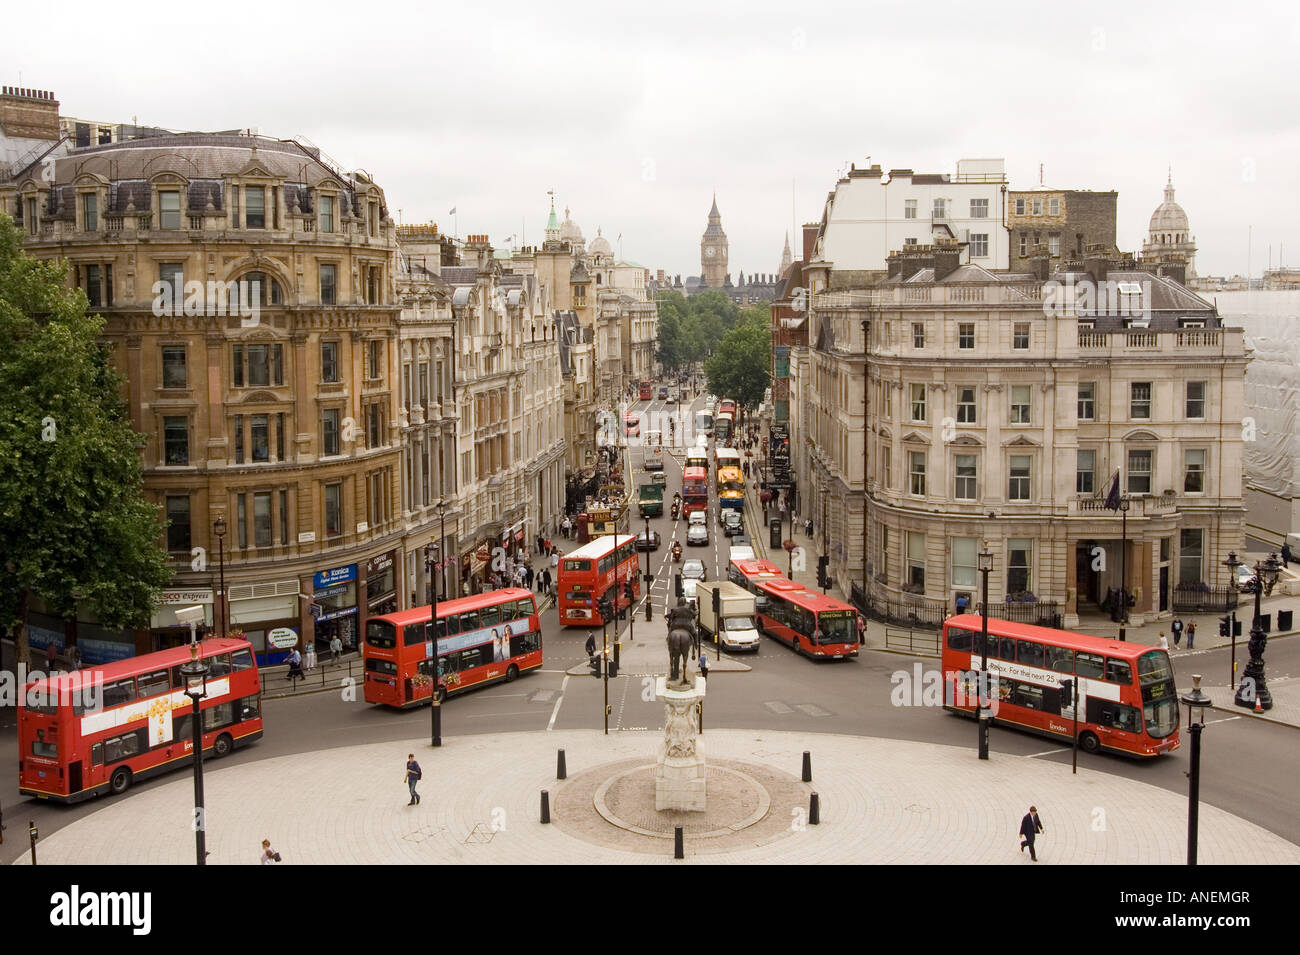 View down Whitehall from Trafalgar Square in London, England. Stock Photo